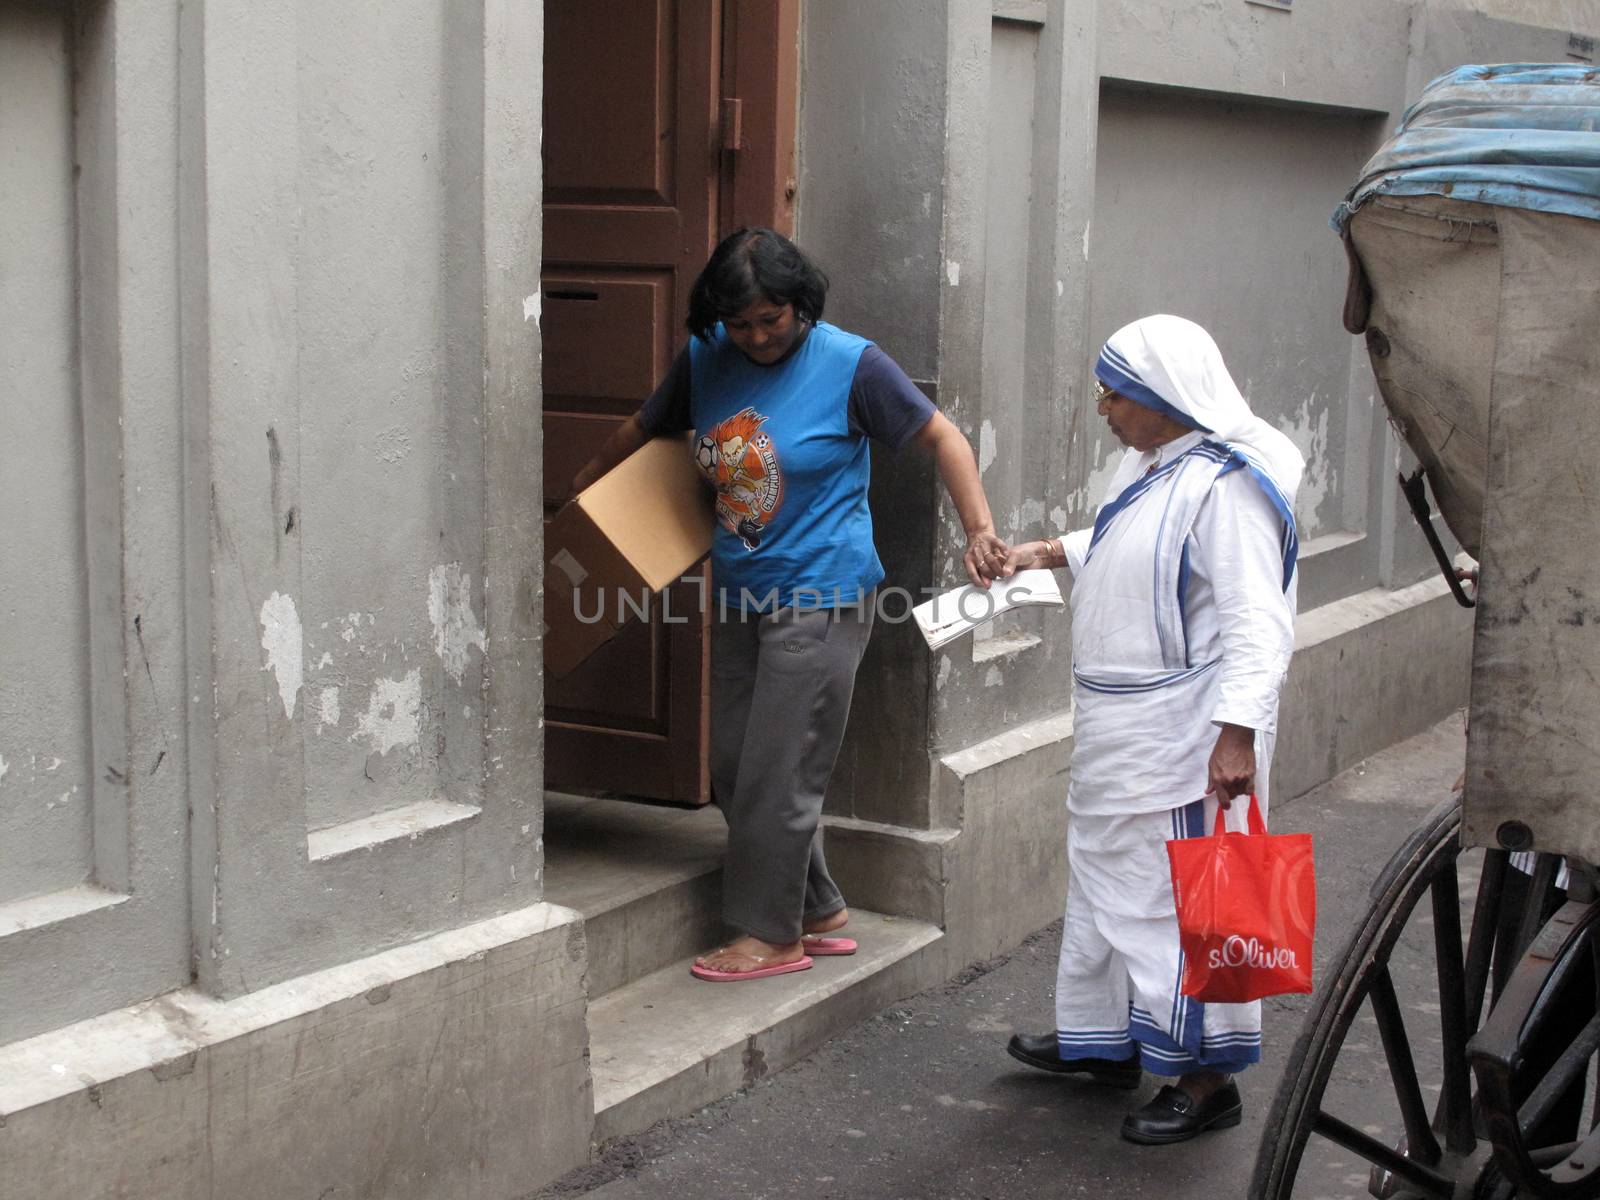 Mother House, the residence of Mother Teresa and headquarters of Missionaries of Charity in Kolkata, West Bengal, India on January 23,2009.